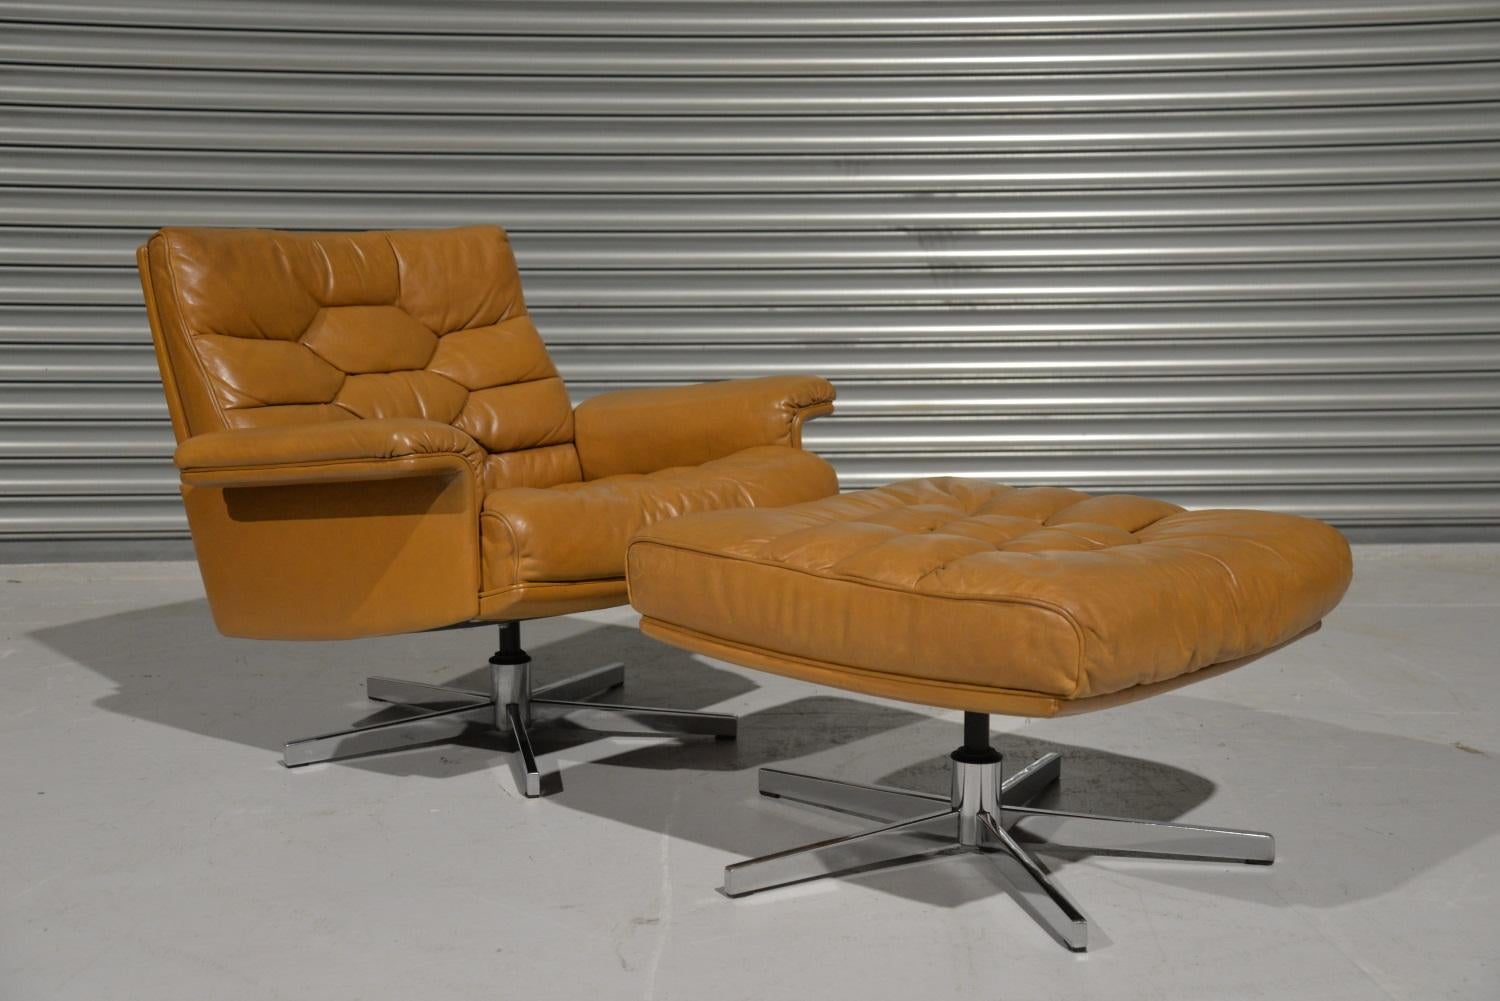 Discounted airfreight for our US and International customers ( from 2 weeks door to door) 

We are delighted to bring to you an ultra-rare and highly desirable De Sede Executive swivel lounge armchair and ottoman. Built in the 1970s by De Sede